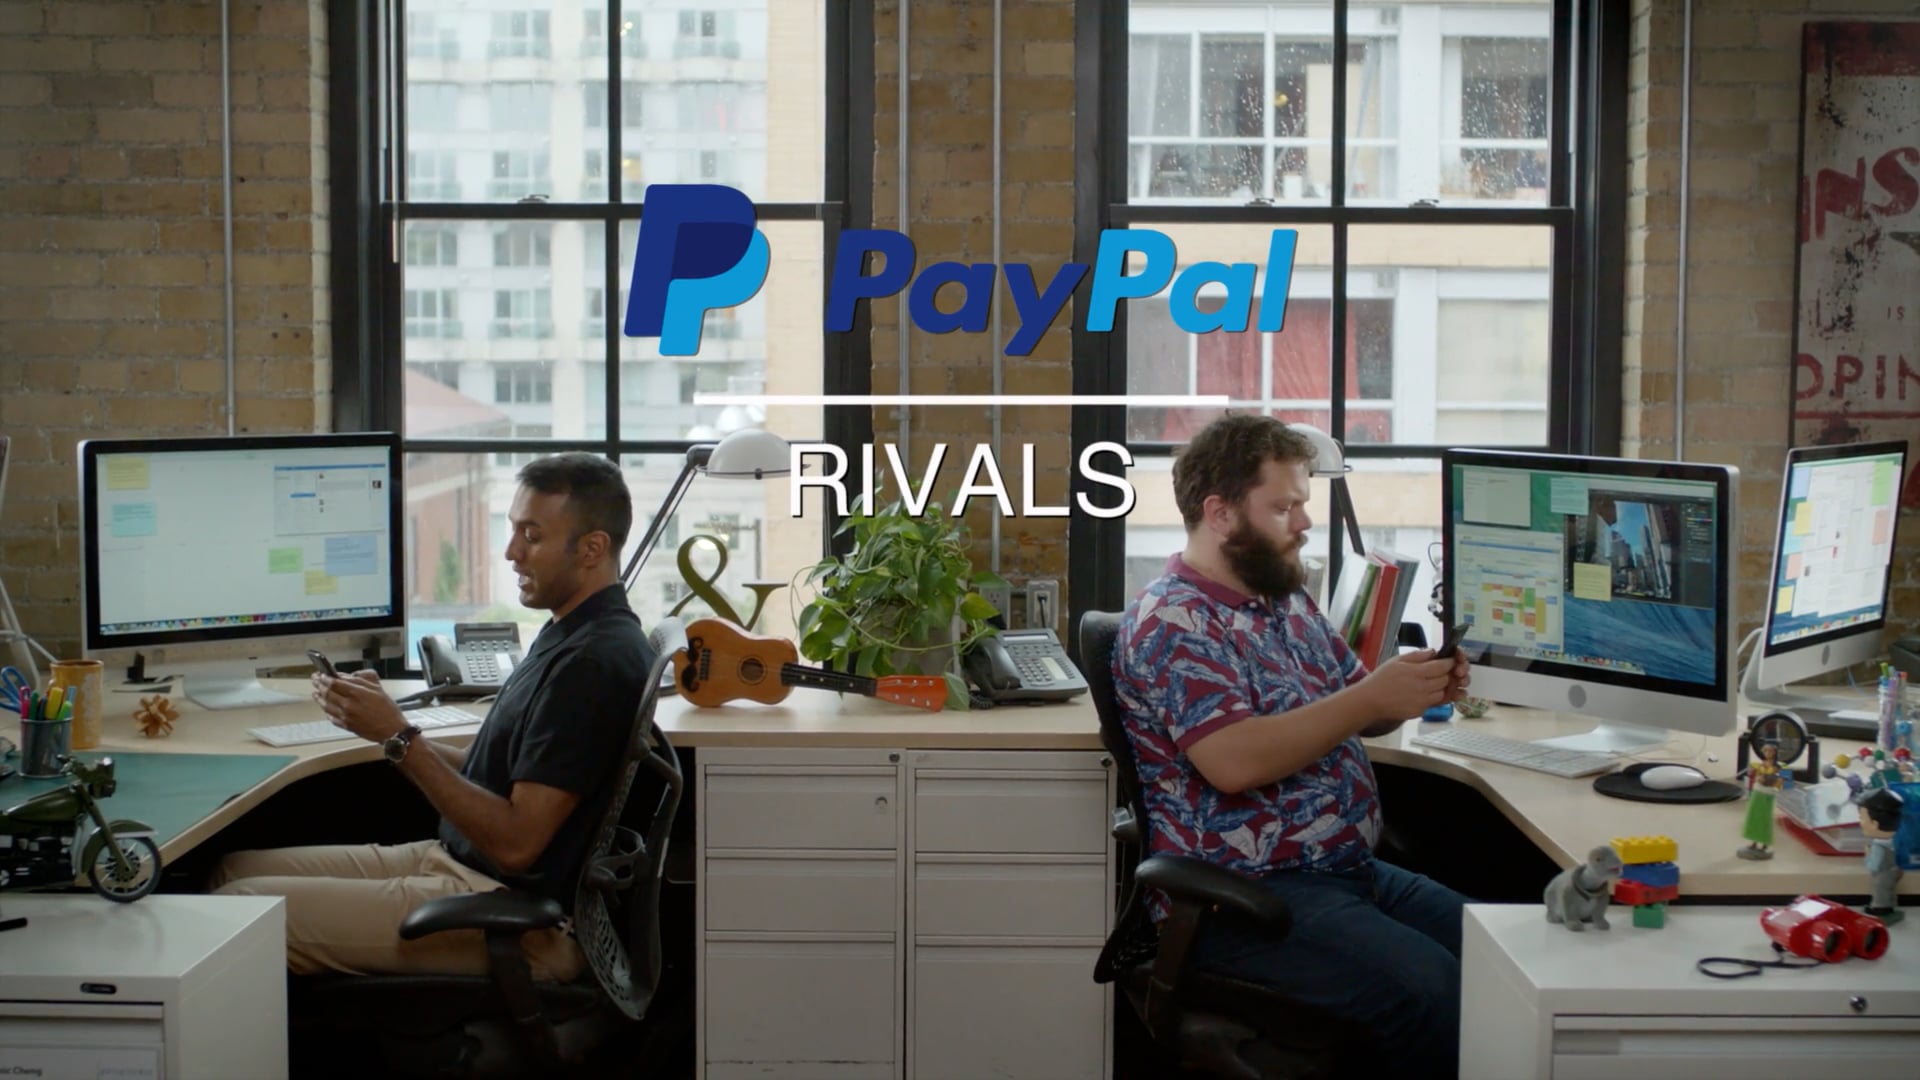 mad - paypal - rivals.mp4